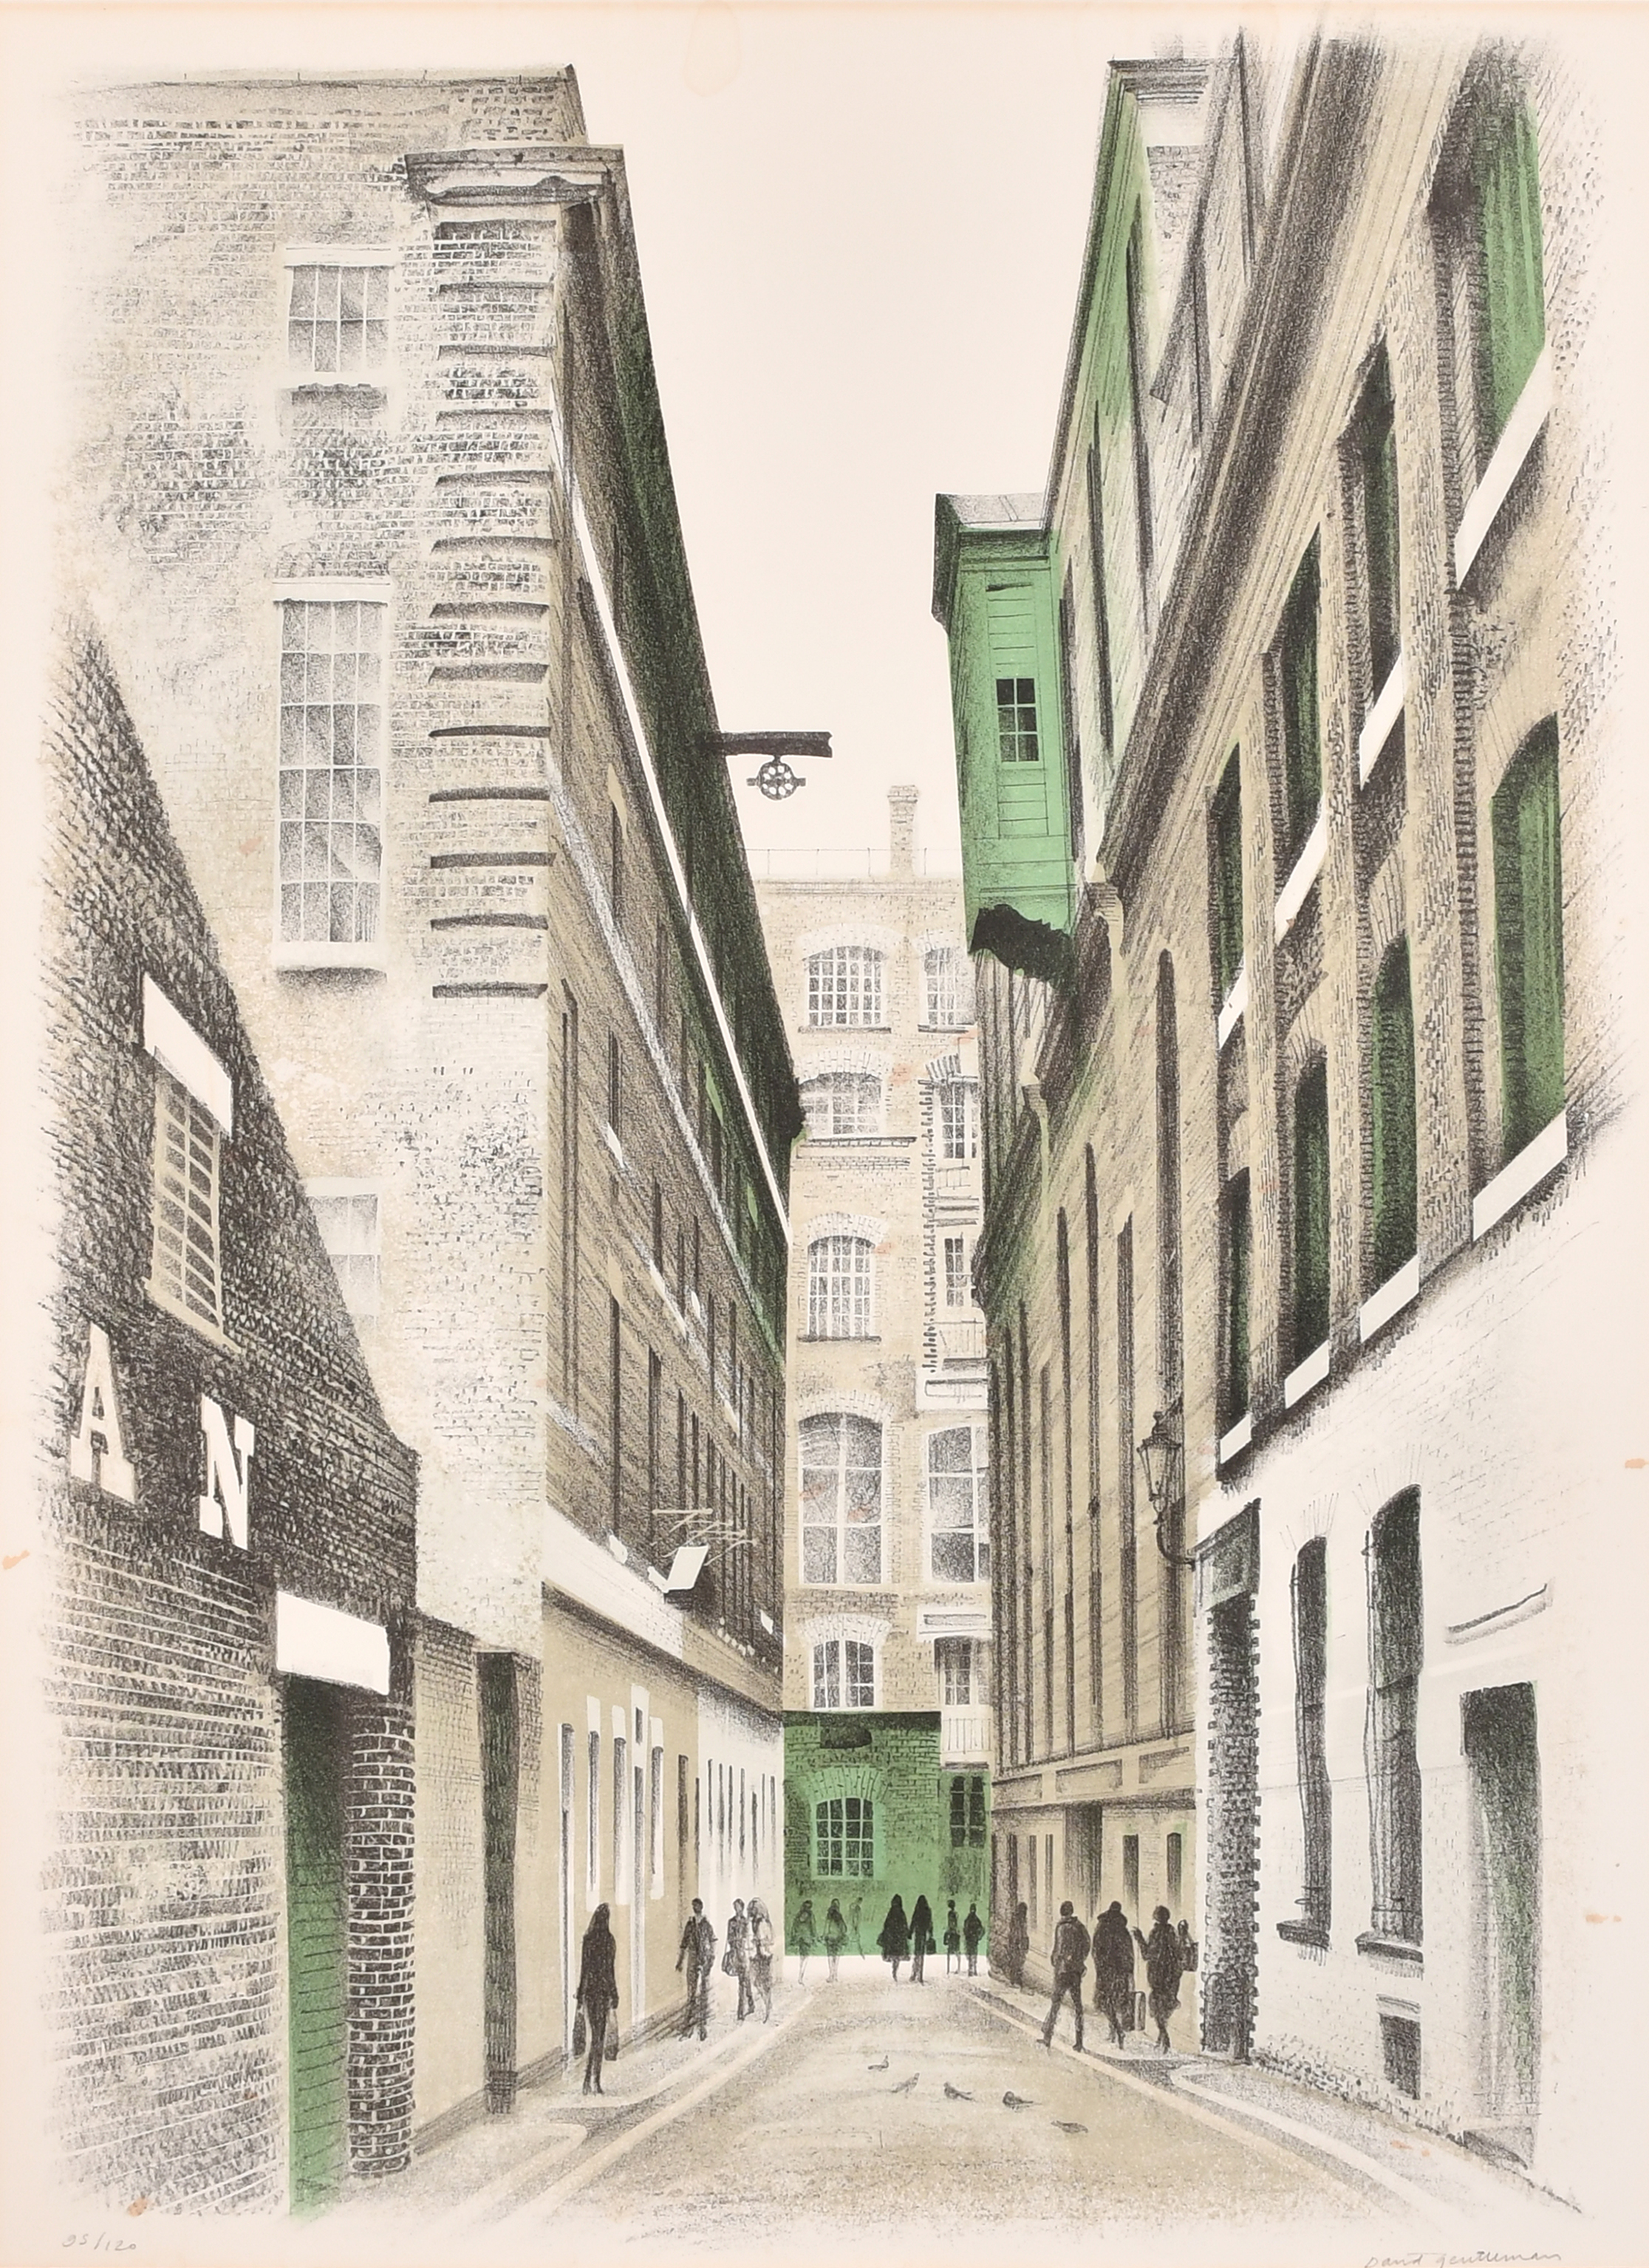 David Gentleman (1930-) British. "Langley Street", Lithograph, Signed and numbered 93/120 in pencil,